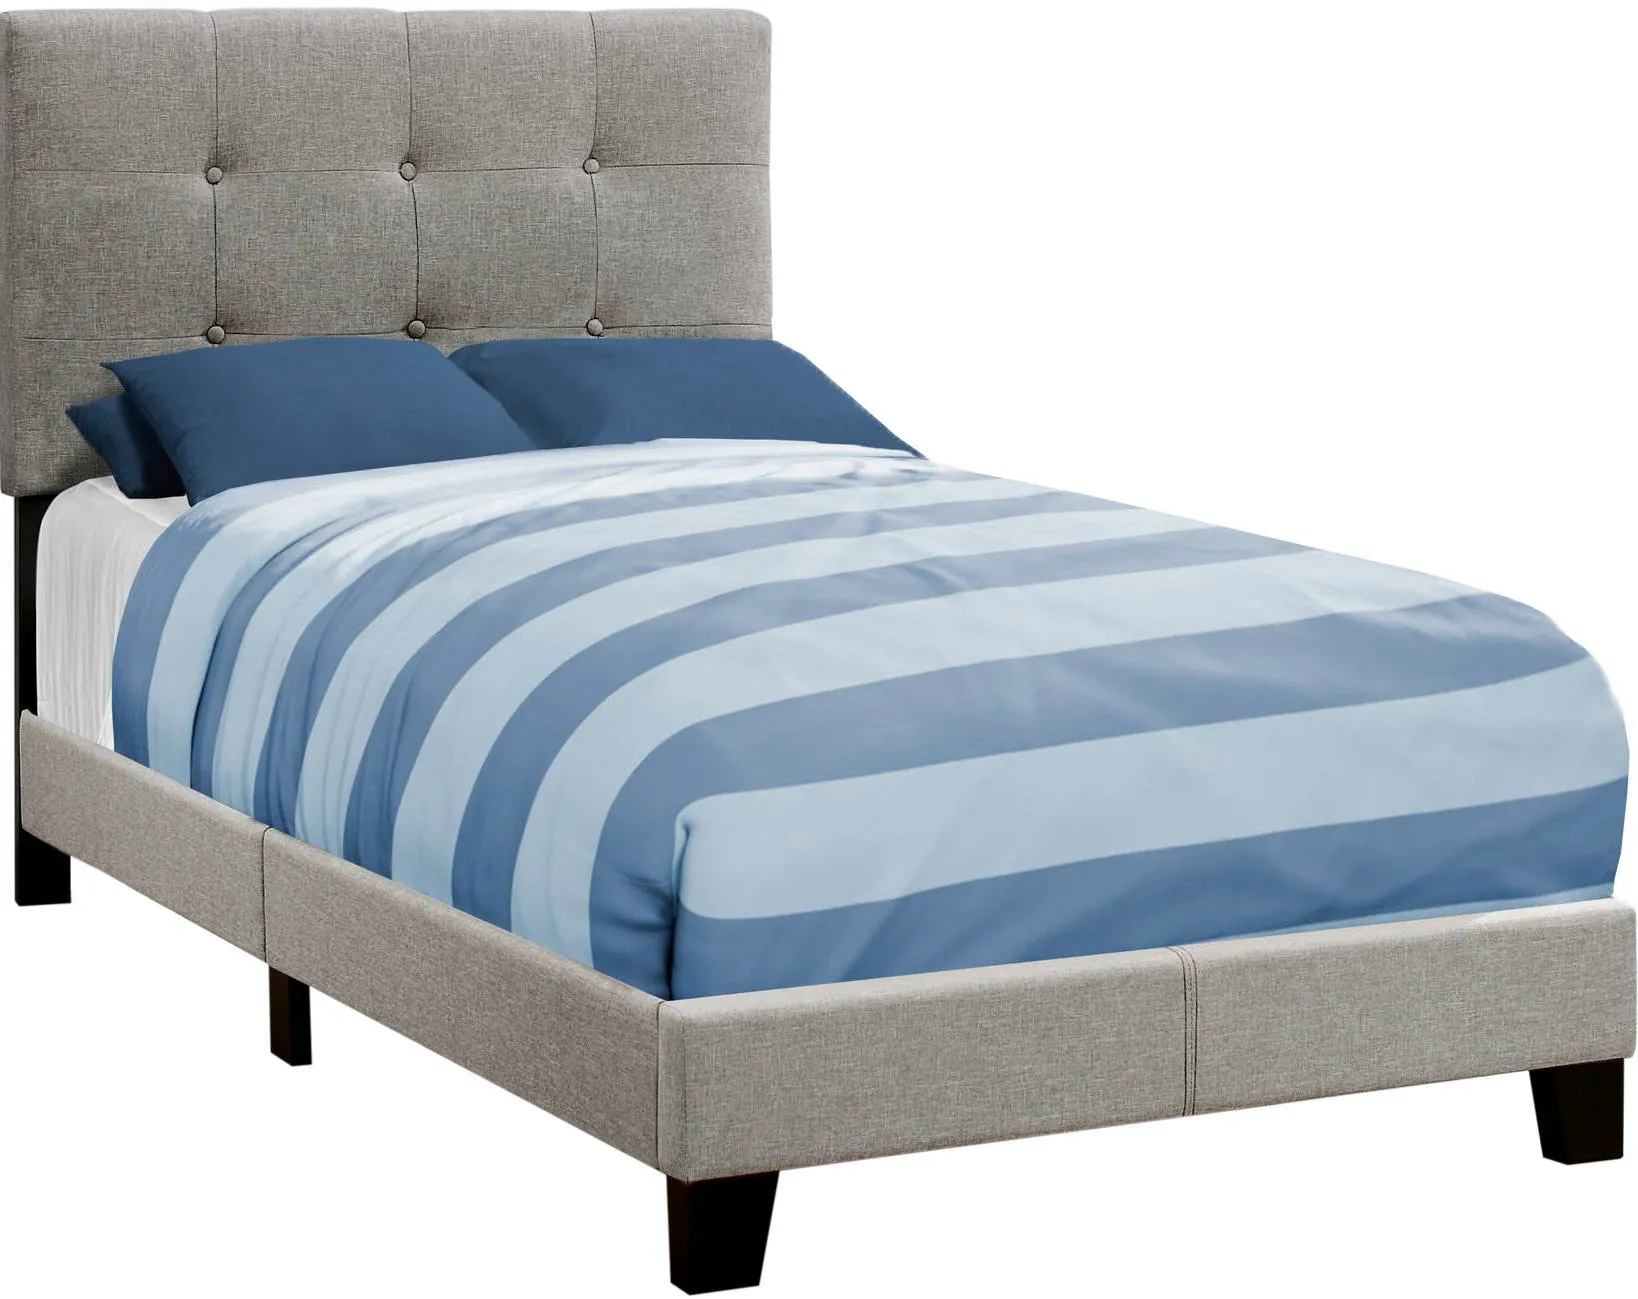 Bed, Twin Size, Platform, Teen, Frame, Upholstered, Linen Look, Wood Legs, Grey, Transitional